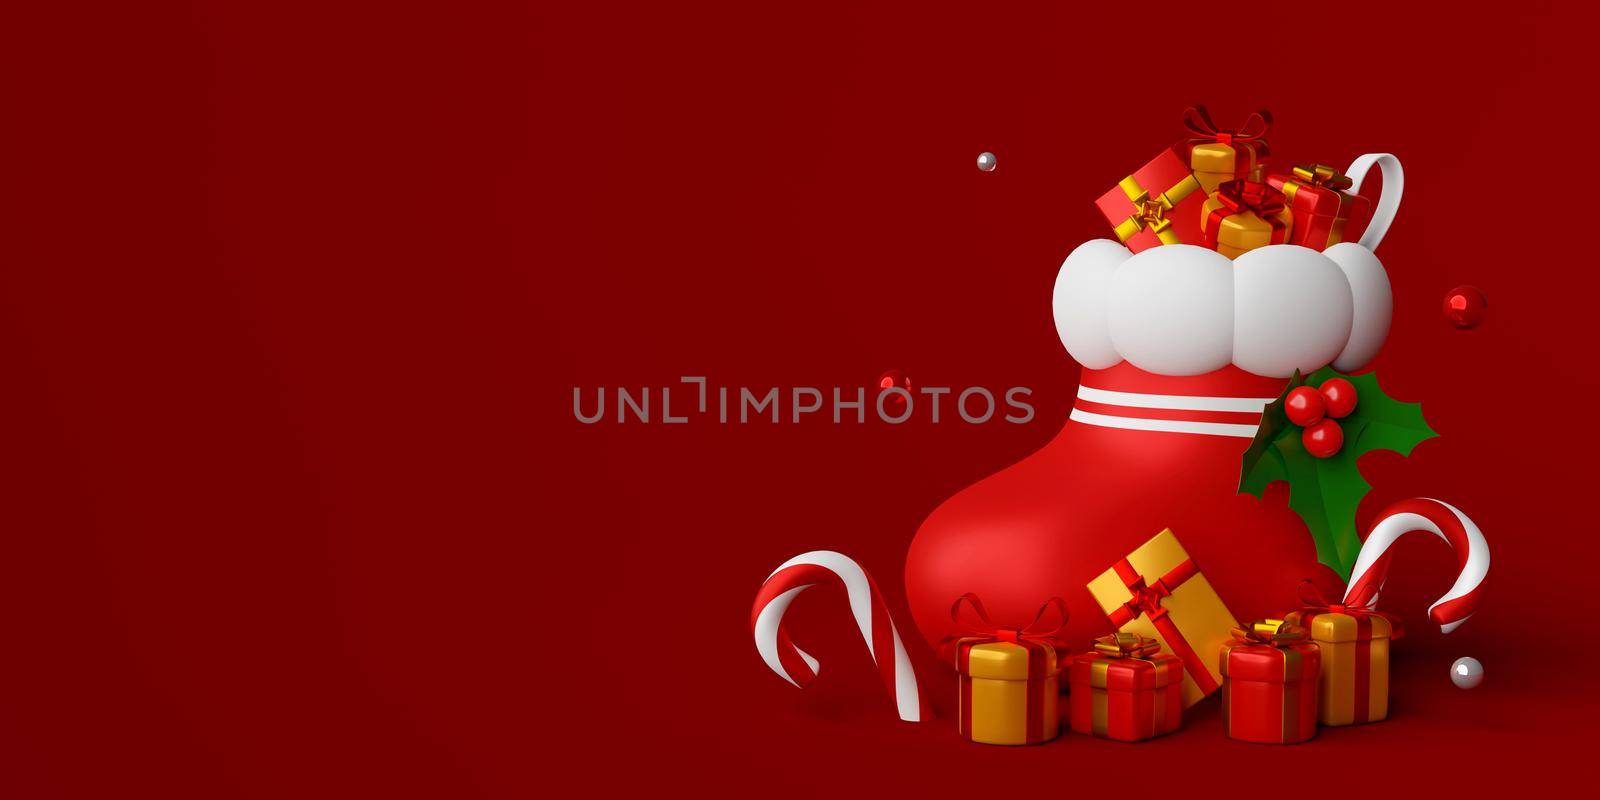 Christmas banner of Christmas sock with gift, 3d illustration by nutzchotwarut